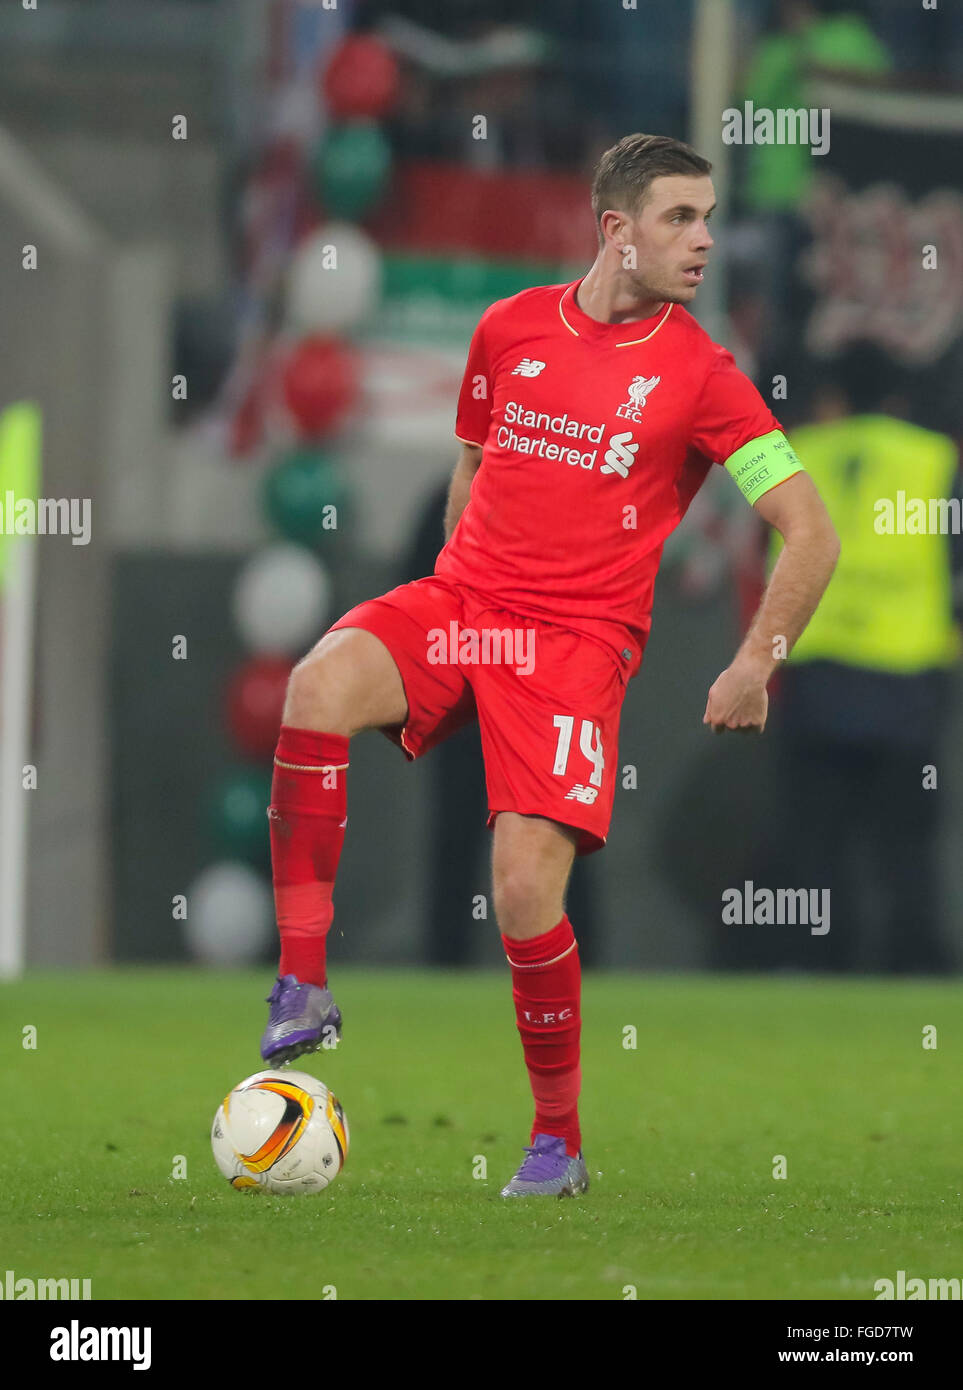 Augsburg, Germany. 18th February, 2016. Jordan HENDERSON, LIV 14   Full figure, action, portrait, single action frame with ball, leather ball, Spielgeraet, Soccer, Balls, official Adidas Torfabrik  during the UEFA Europa League Round of 32: First Leg match FC Augsburg - Liverpool 0-0 on February 18, 2016 in Augsburg, Germany. Credit:  Peter Schatz / Alamy Live News Stock Photo